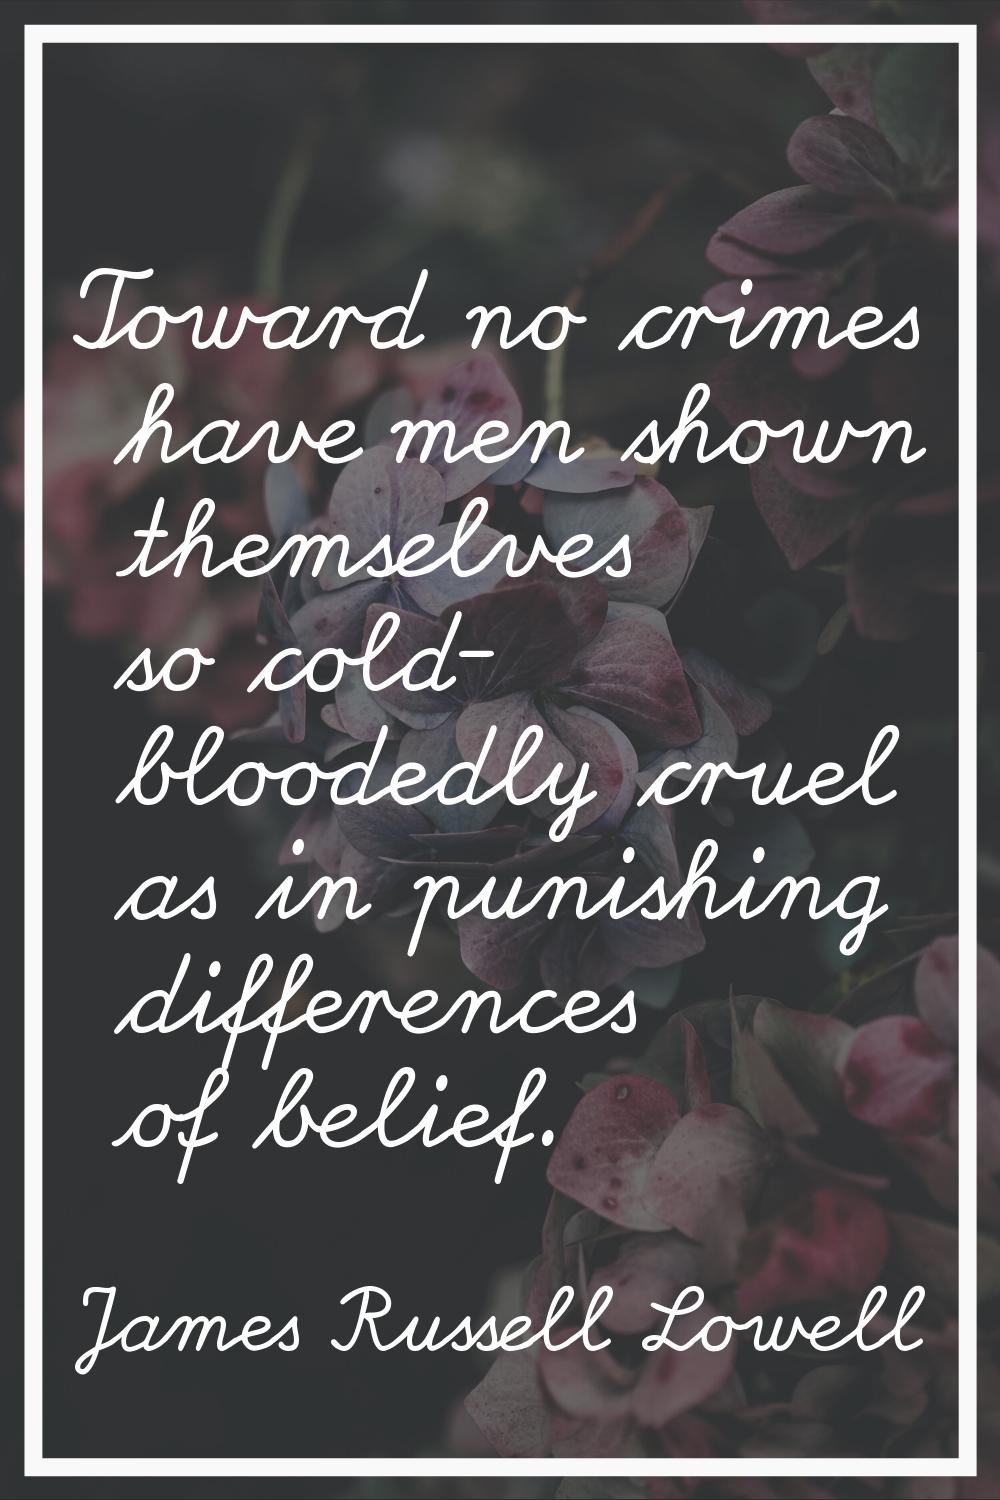 Toward no crimes have men shown themselves so cold- bloodedly cruel as in punishing differences of 